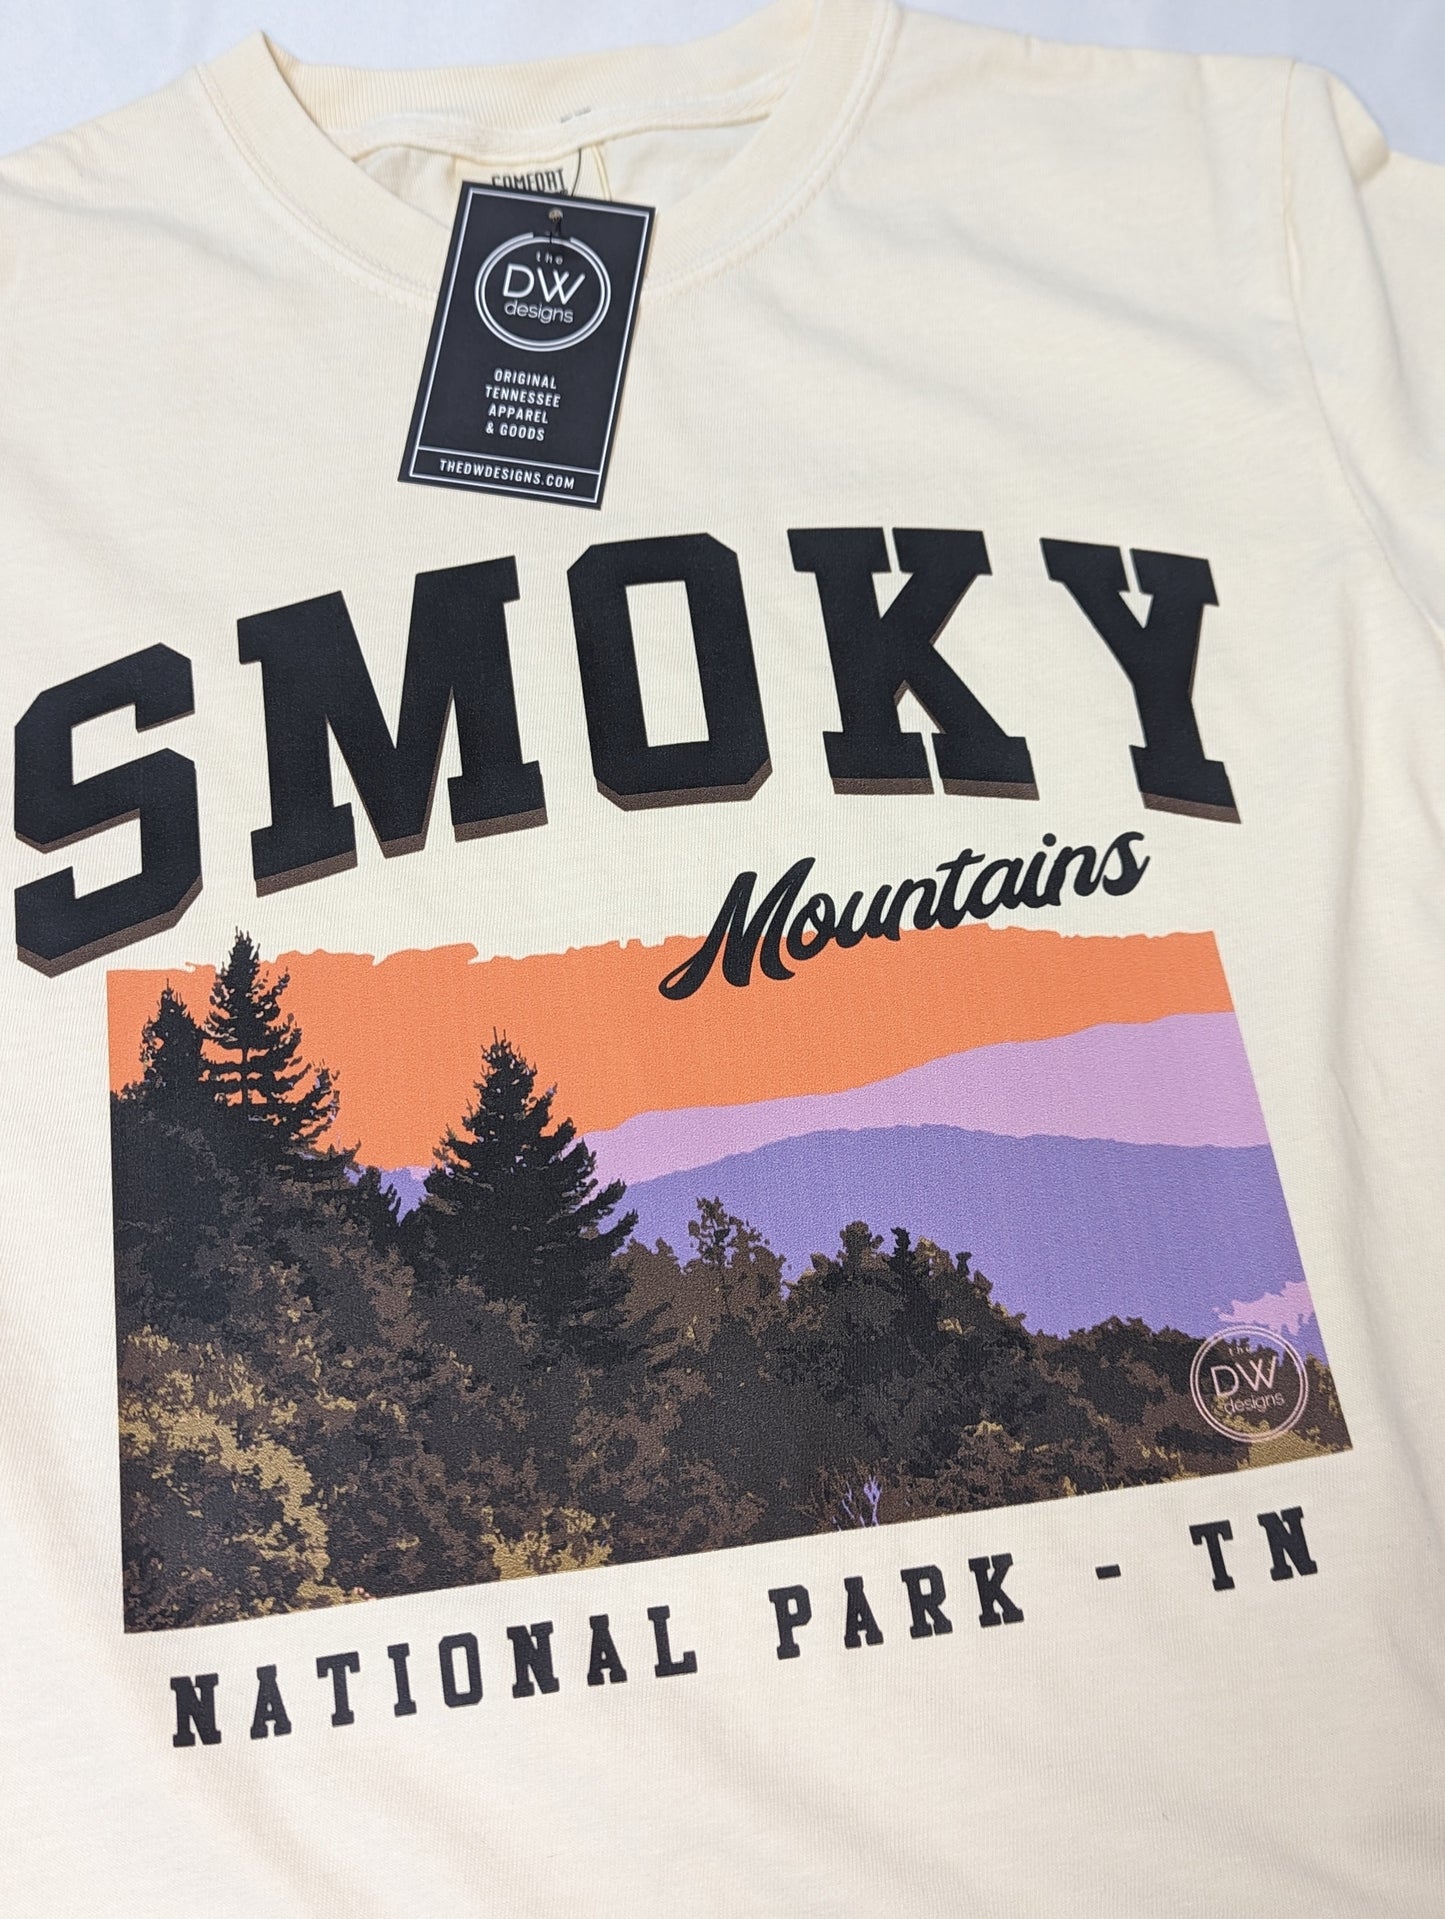 The Smoky Mountains Graphic Tee features a colorful mountain sunset above the trees in the Smoky Mountains National Park, printed on an off-white t-shirt. Sold by The DW Designs, Knoxville, TN.